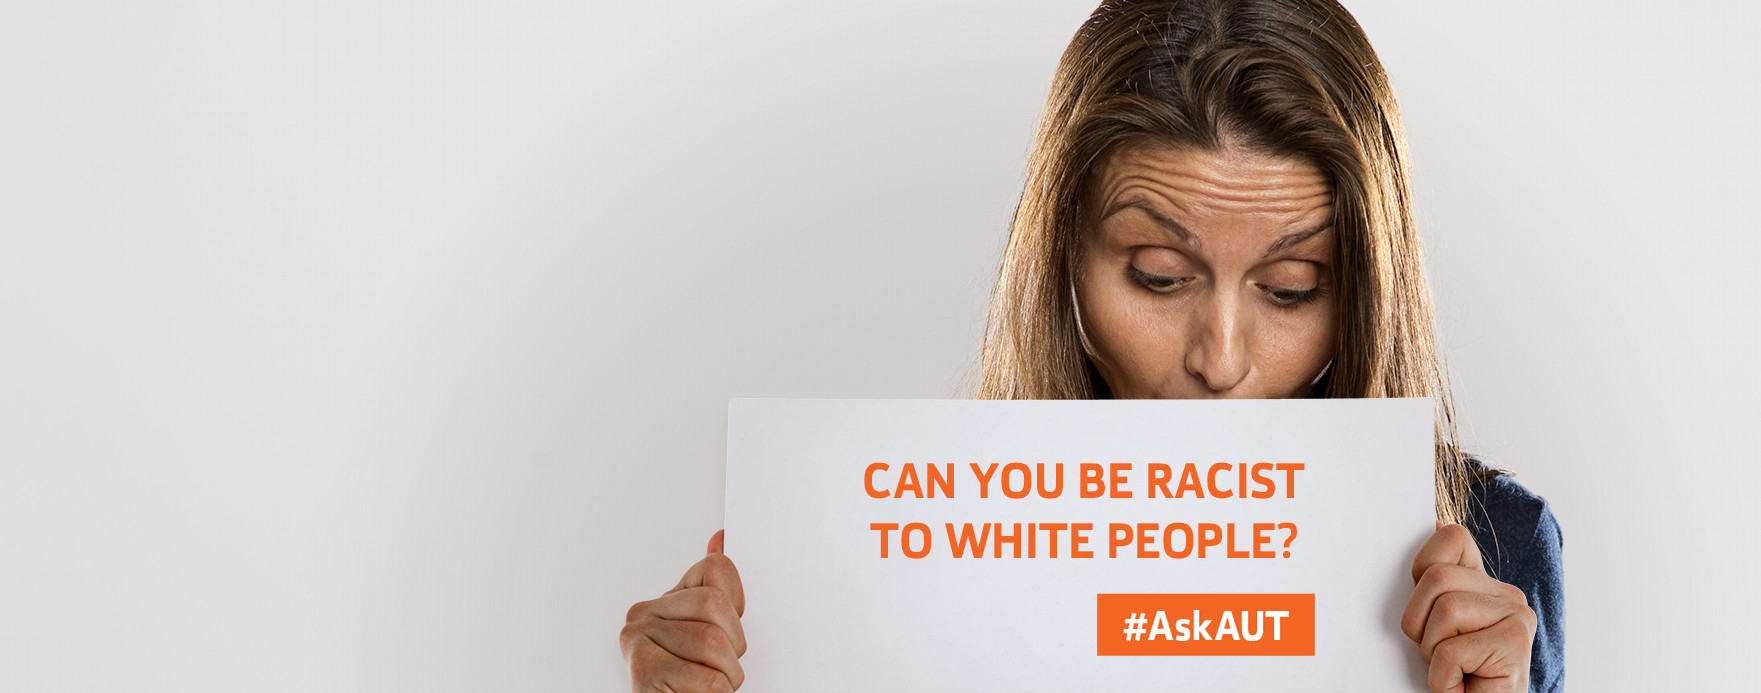 Can you be racist to white people?